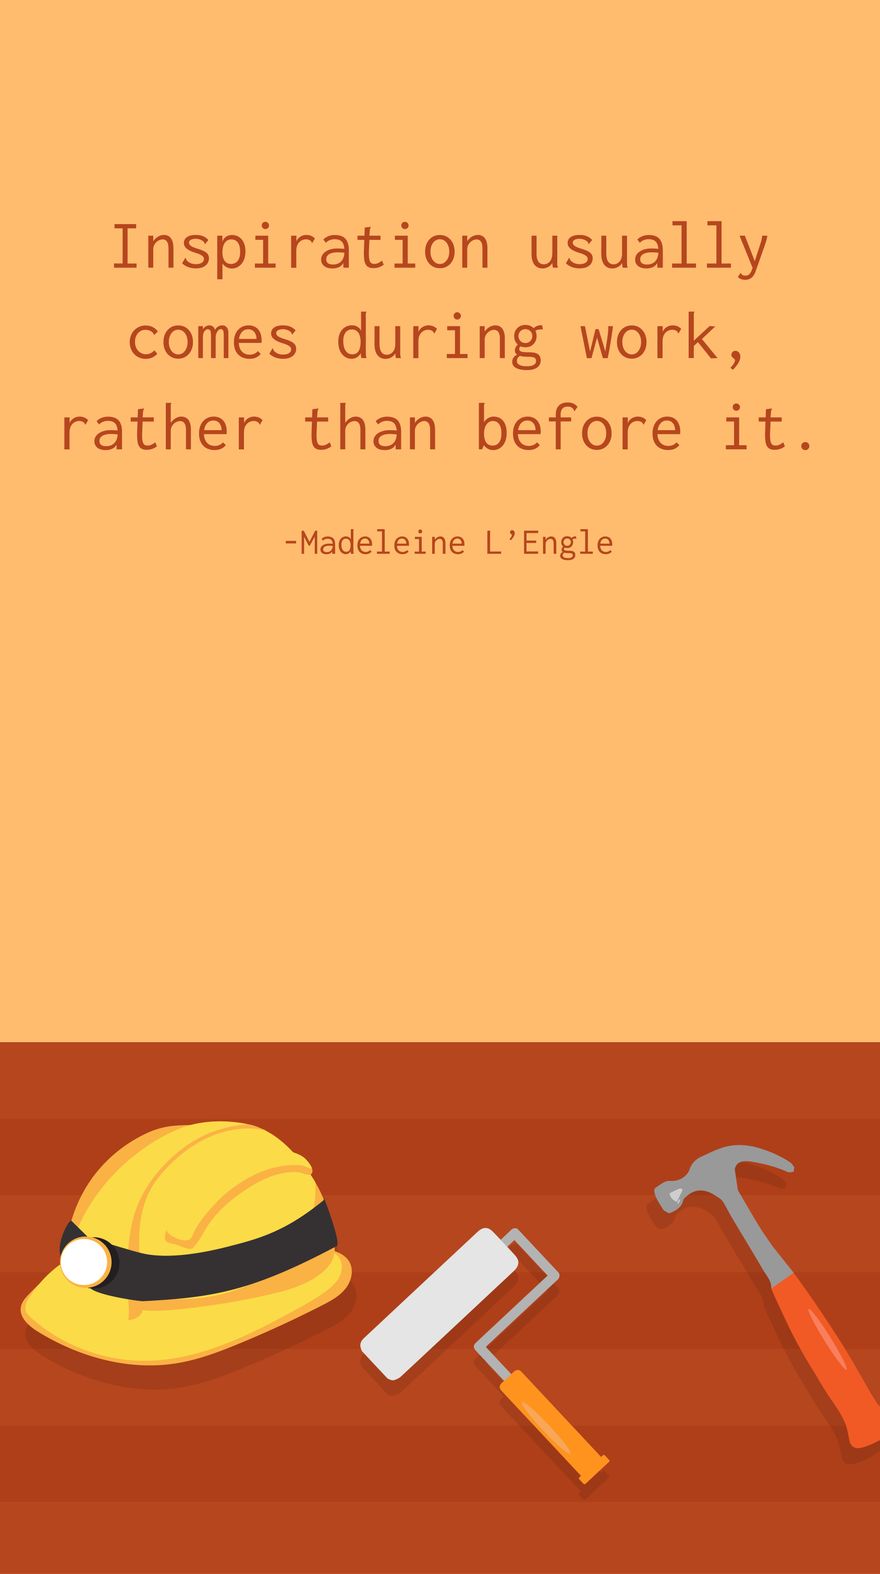 Free Madeleine L’Engle - Inspiration usually comes during work, rather than before it. in JPG